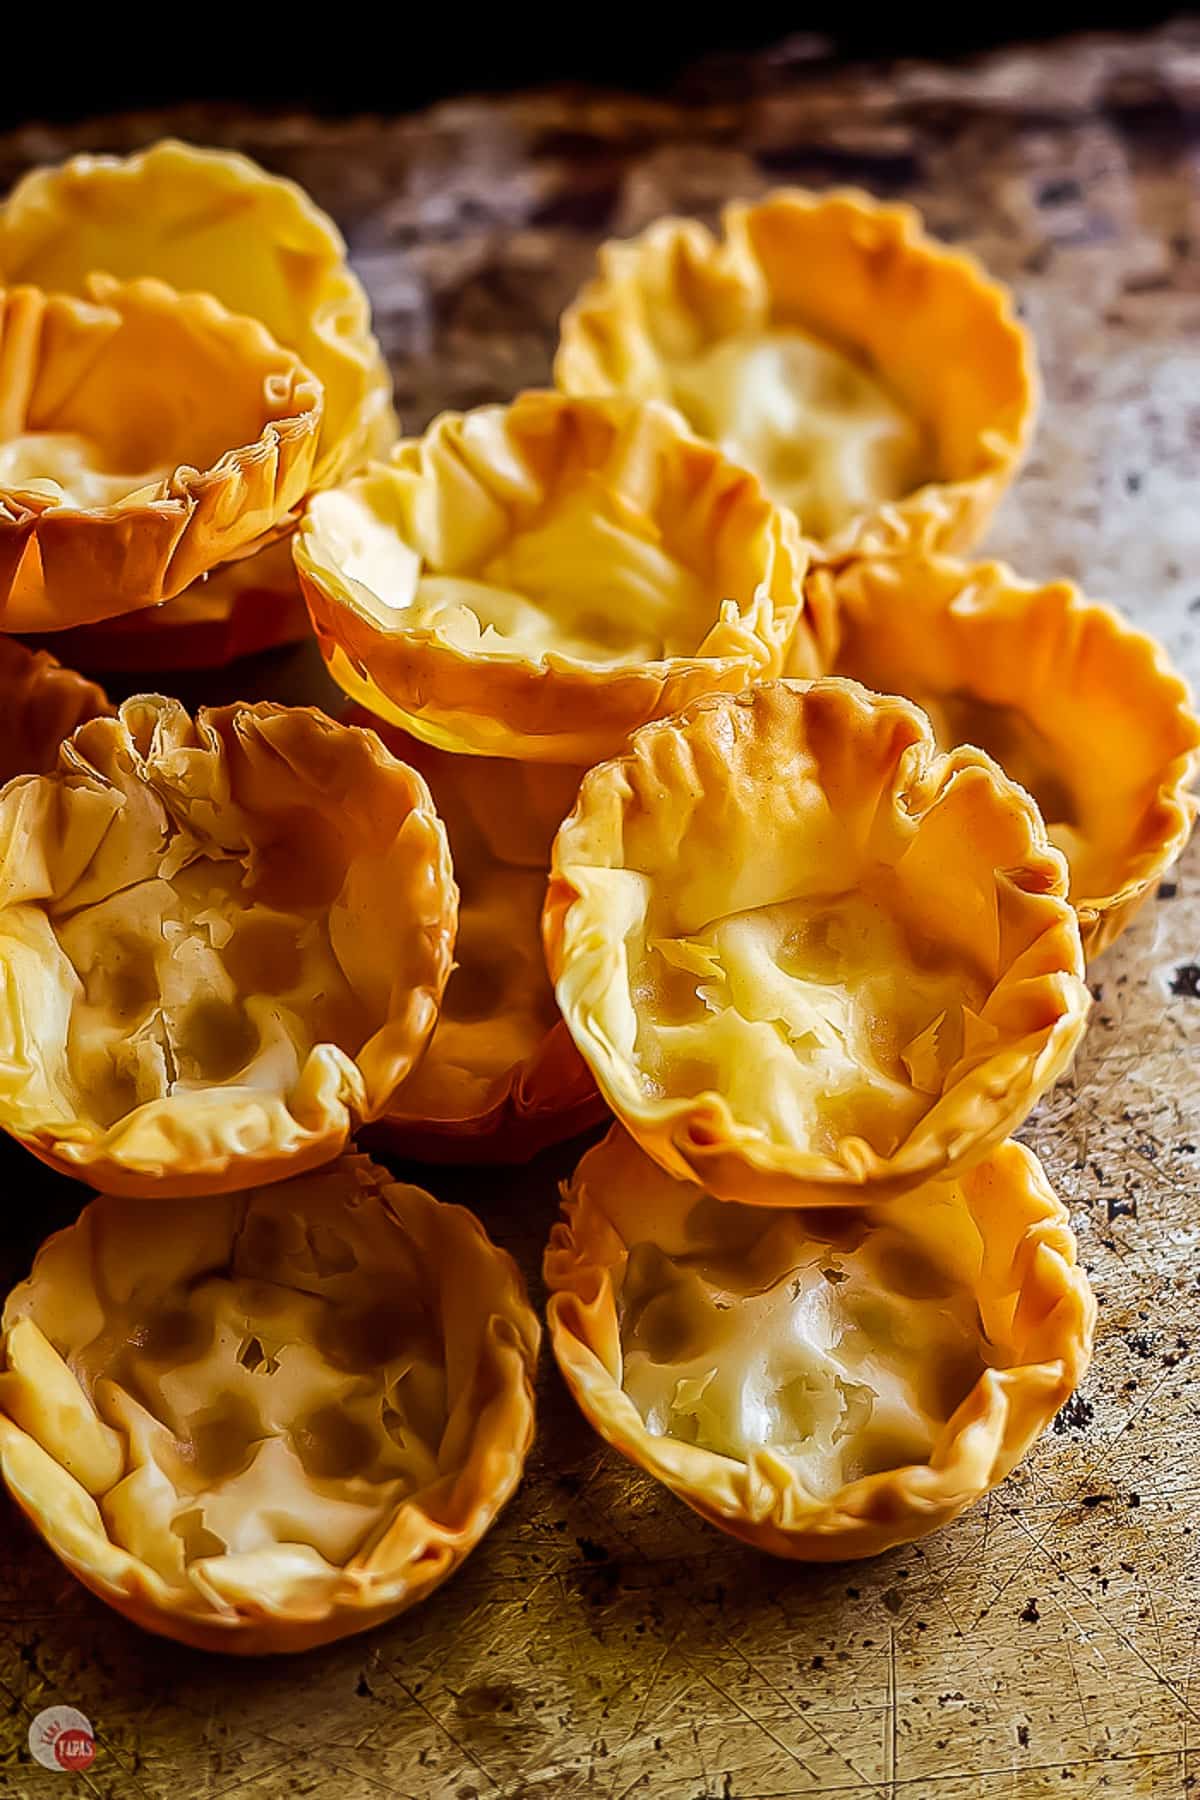 https://www.taketwotapas.com/wp-content/uploads/2021/10/Homemade-Phyllo-Cups-Take-Two-Tapas-7.jpg